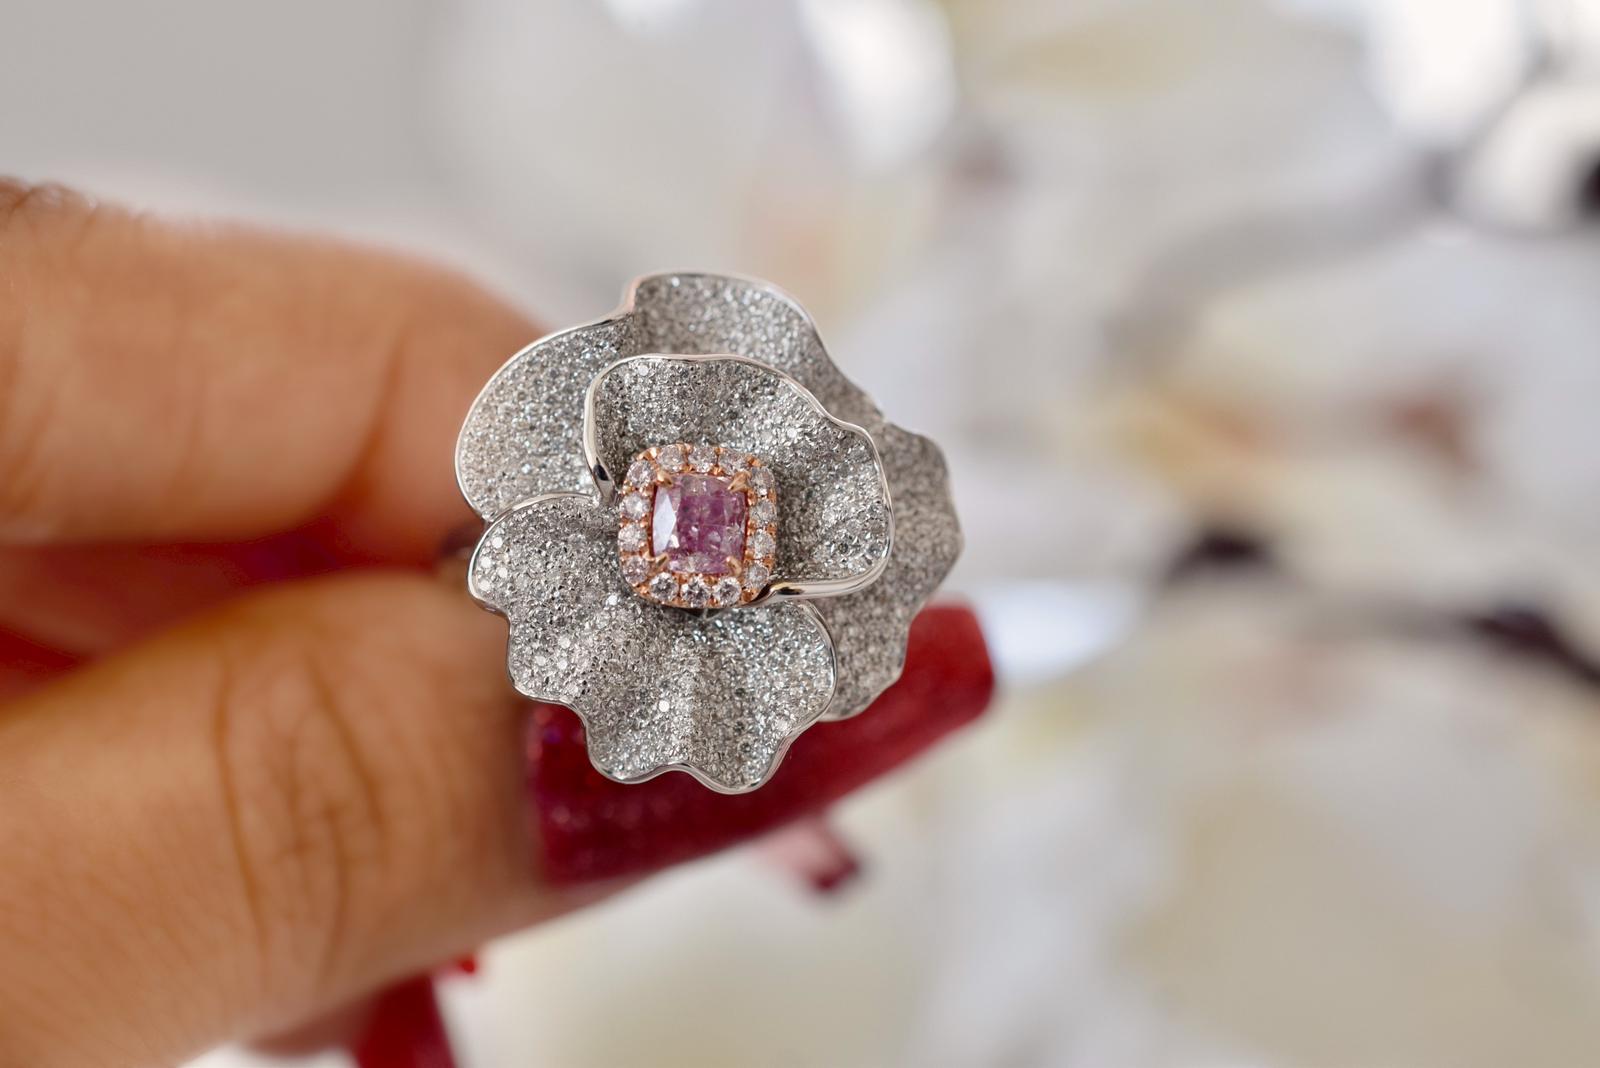 **100% NATURAL FANCY COLOUR DIAMOND JEWELLERIES**

✪ Jewelry Details ✪

♦ MAIN STONE DETAILS

➛ Stone Shape: Cushion
➛ Stone Color: Faint Pink
➛ Stone Weight: 0.35 carats
➛ Clarity: VS1
➛ GIA certified

♦ SIDE STONE DETAILS

➛ Side white diamonds -